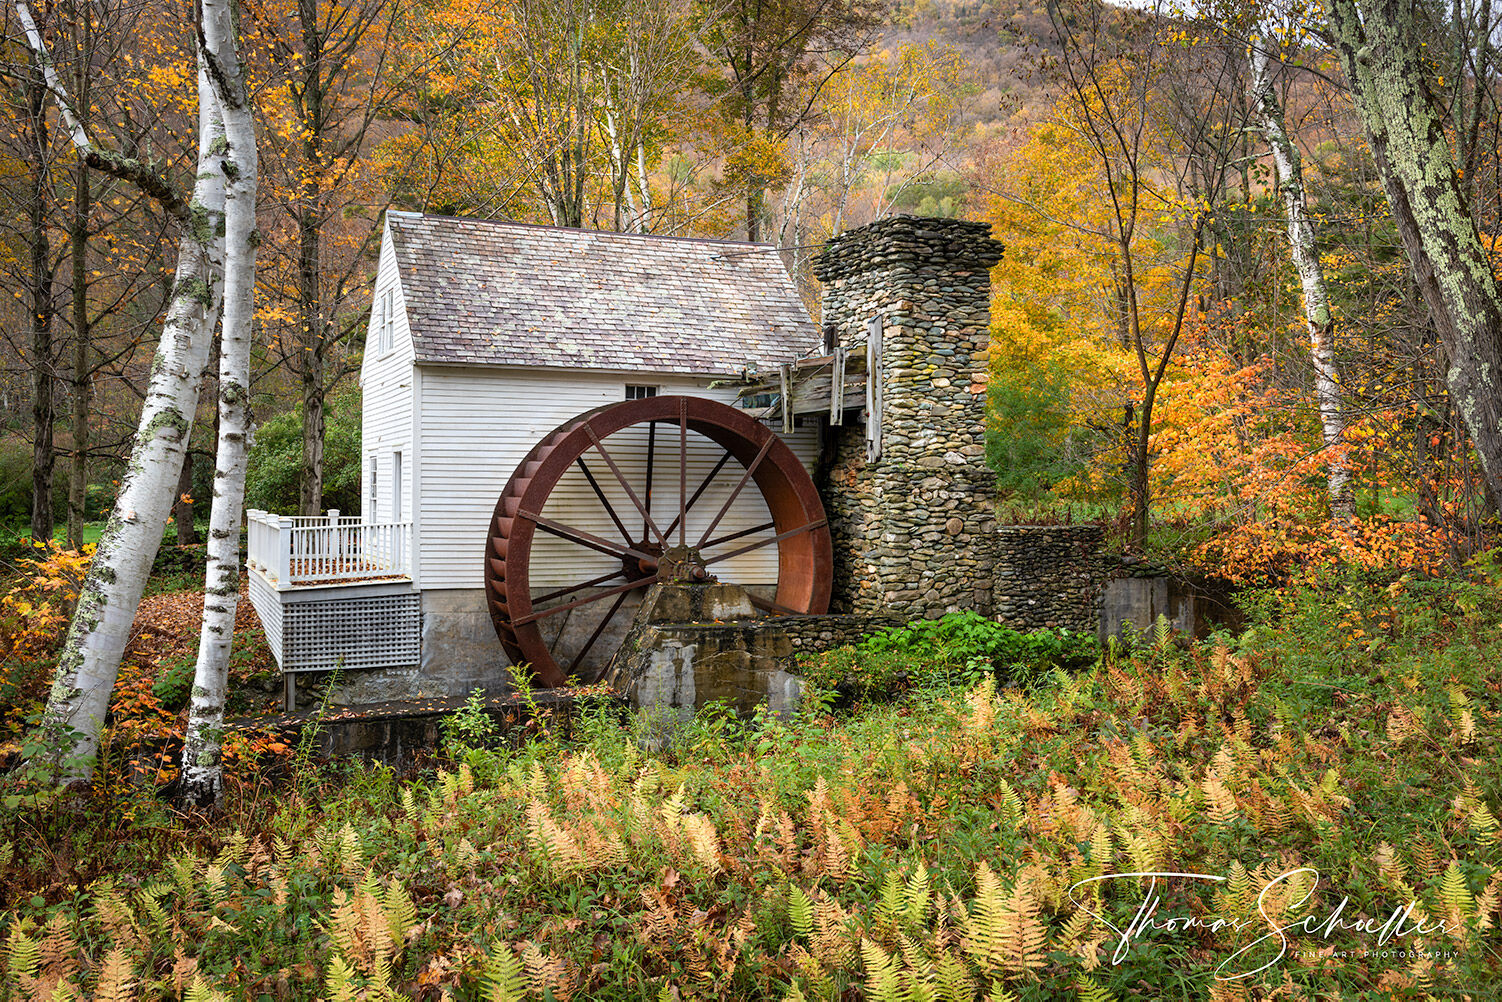 Charming rustic Dorsett Vermont Grist Mill in an enchanting setting during peak fall foliage | Fine Art Prints for sale 